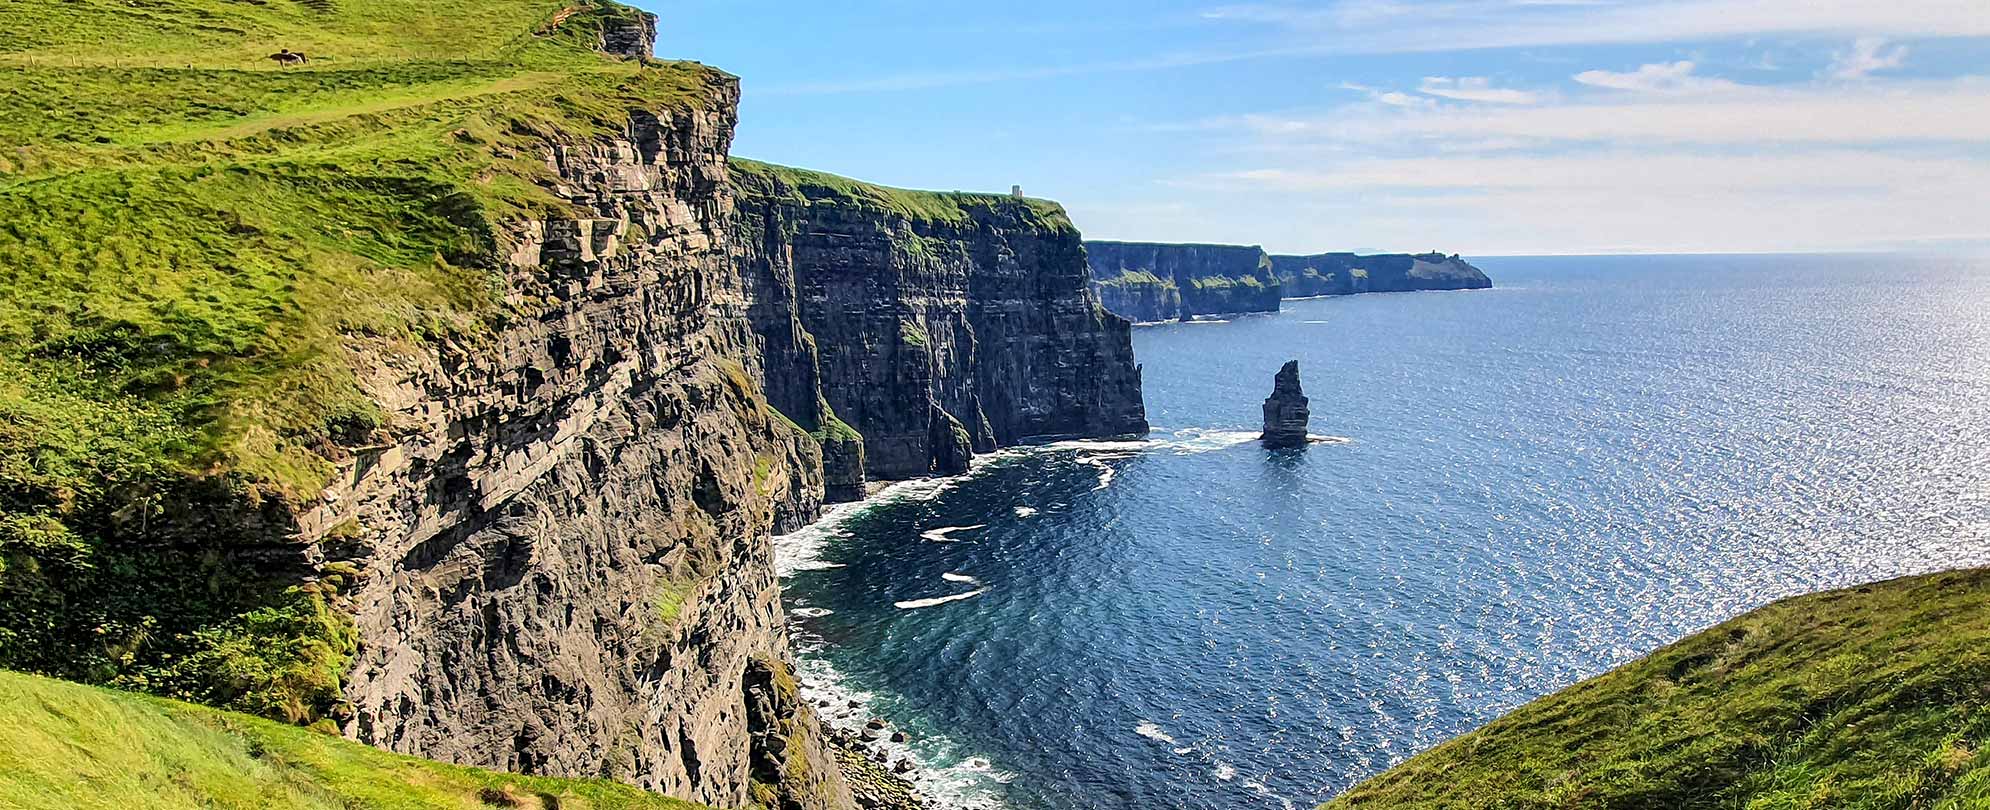 The Cliffs of Moher and the sea in Ireland.